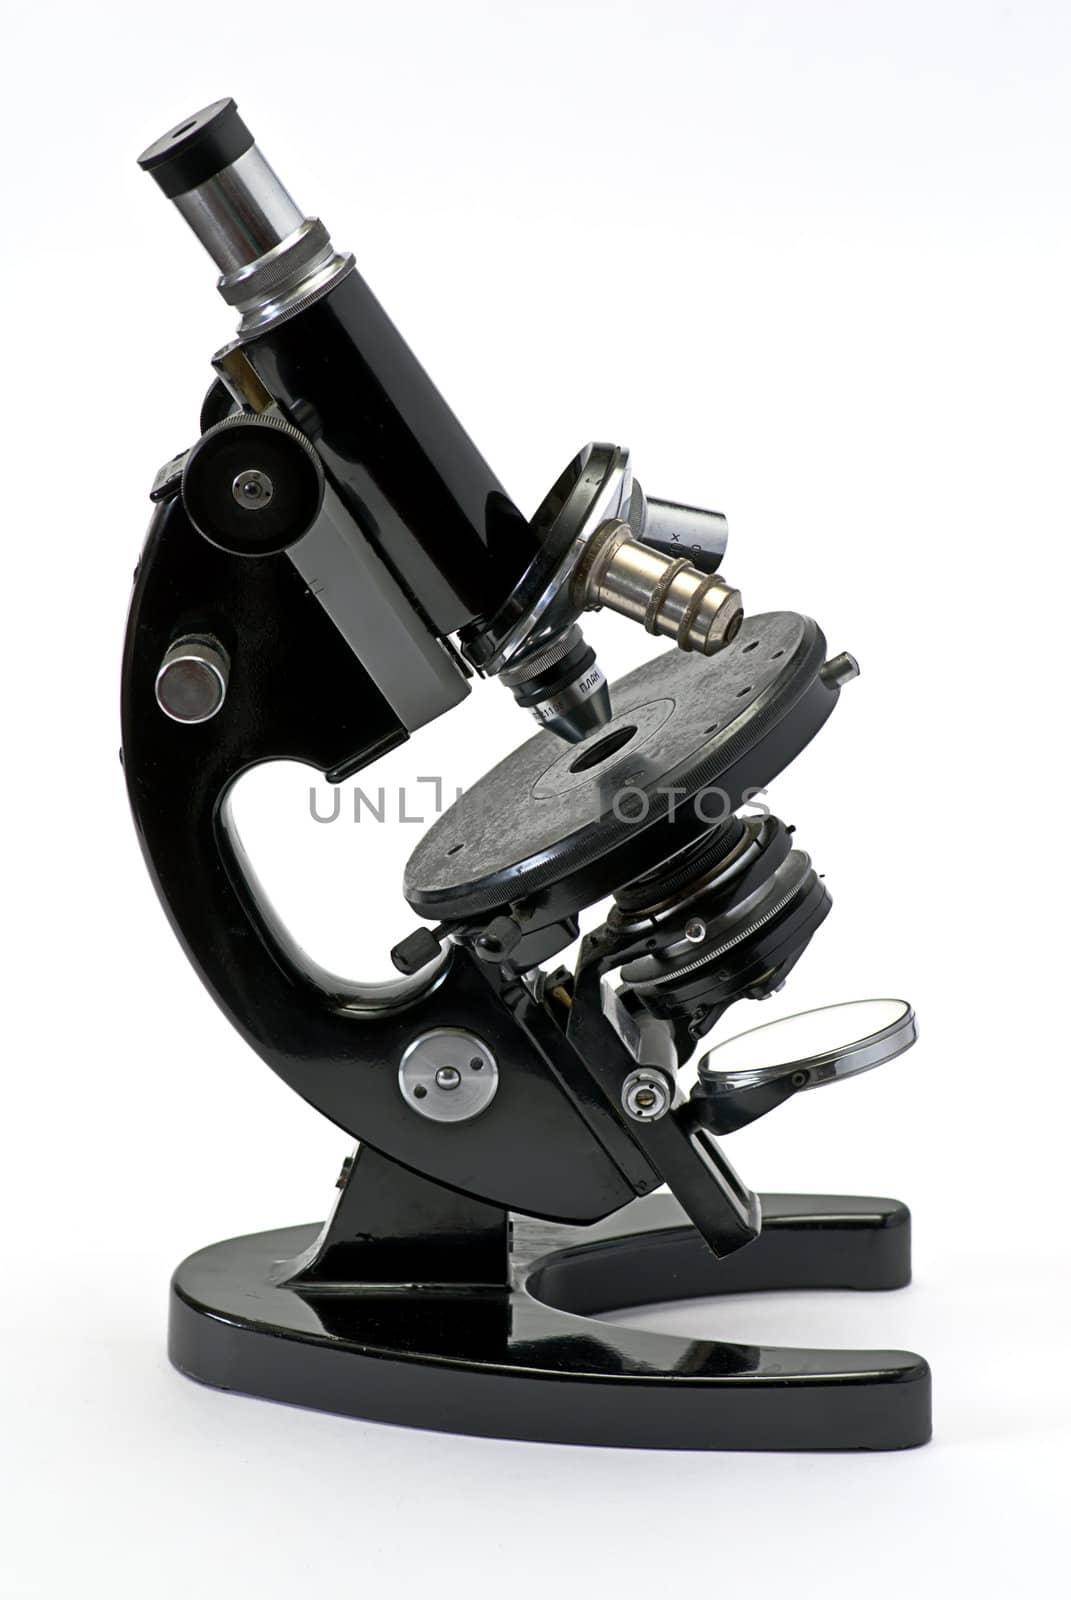 old optical microscope isolated on white